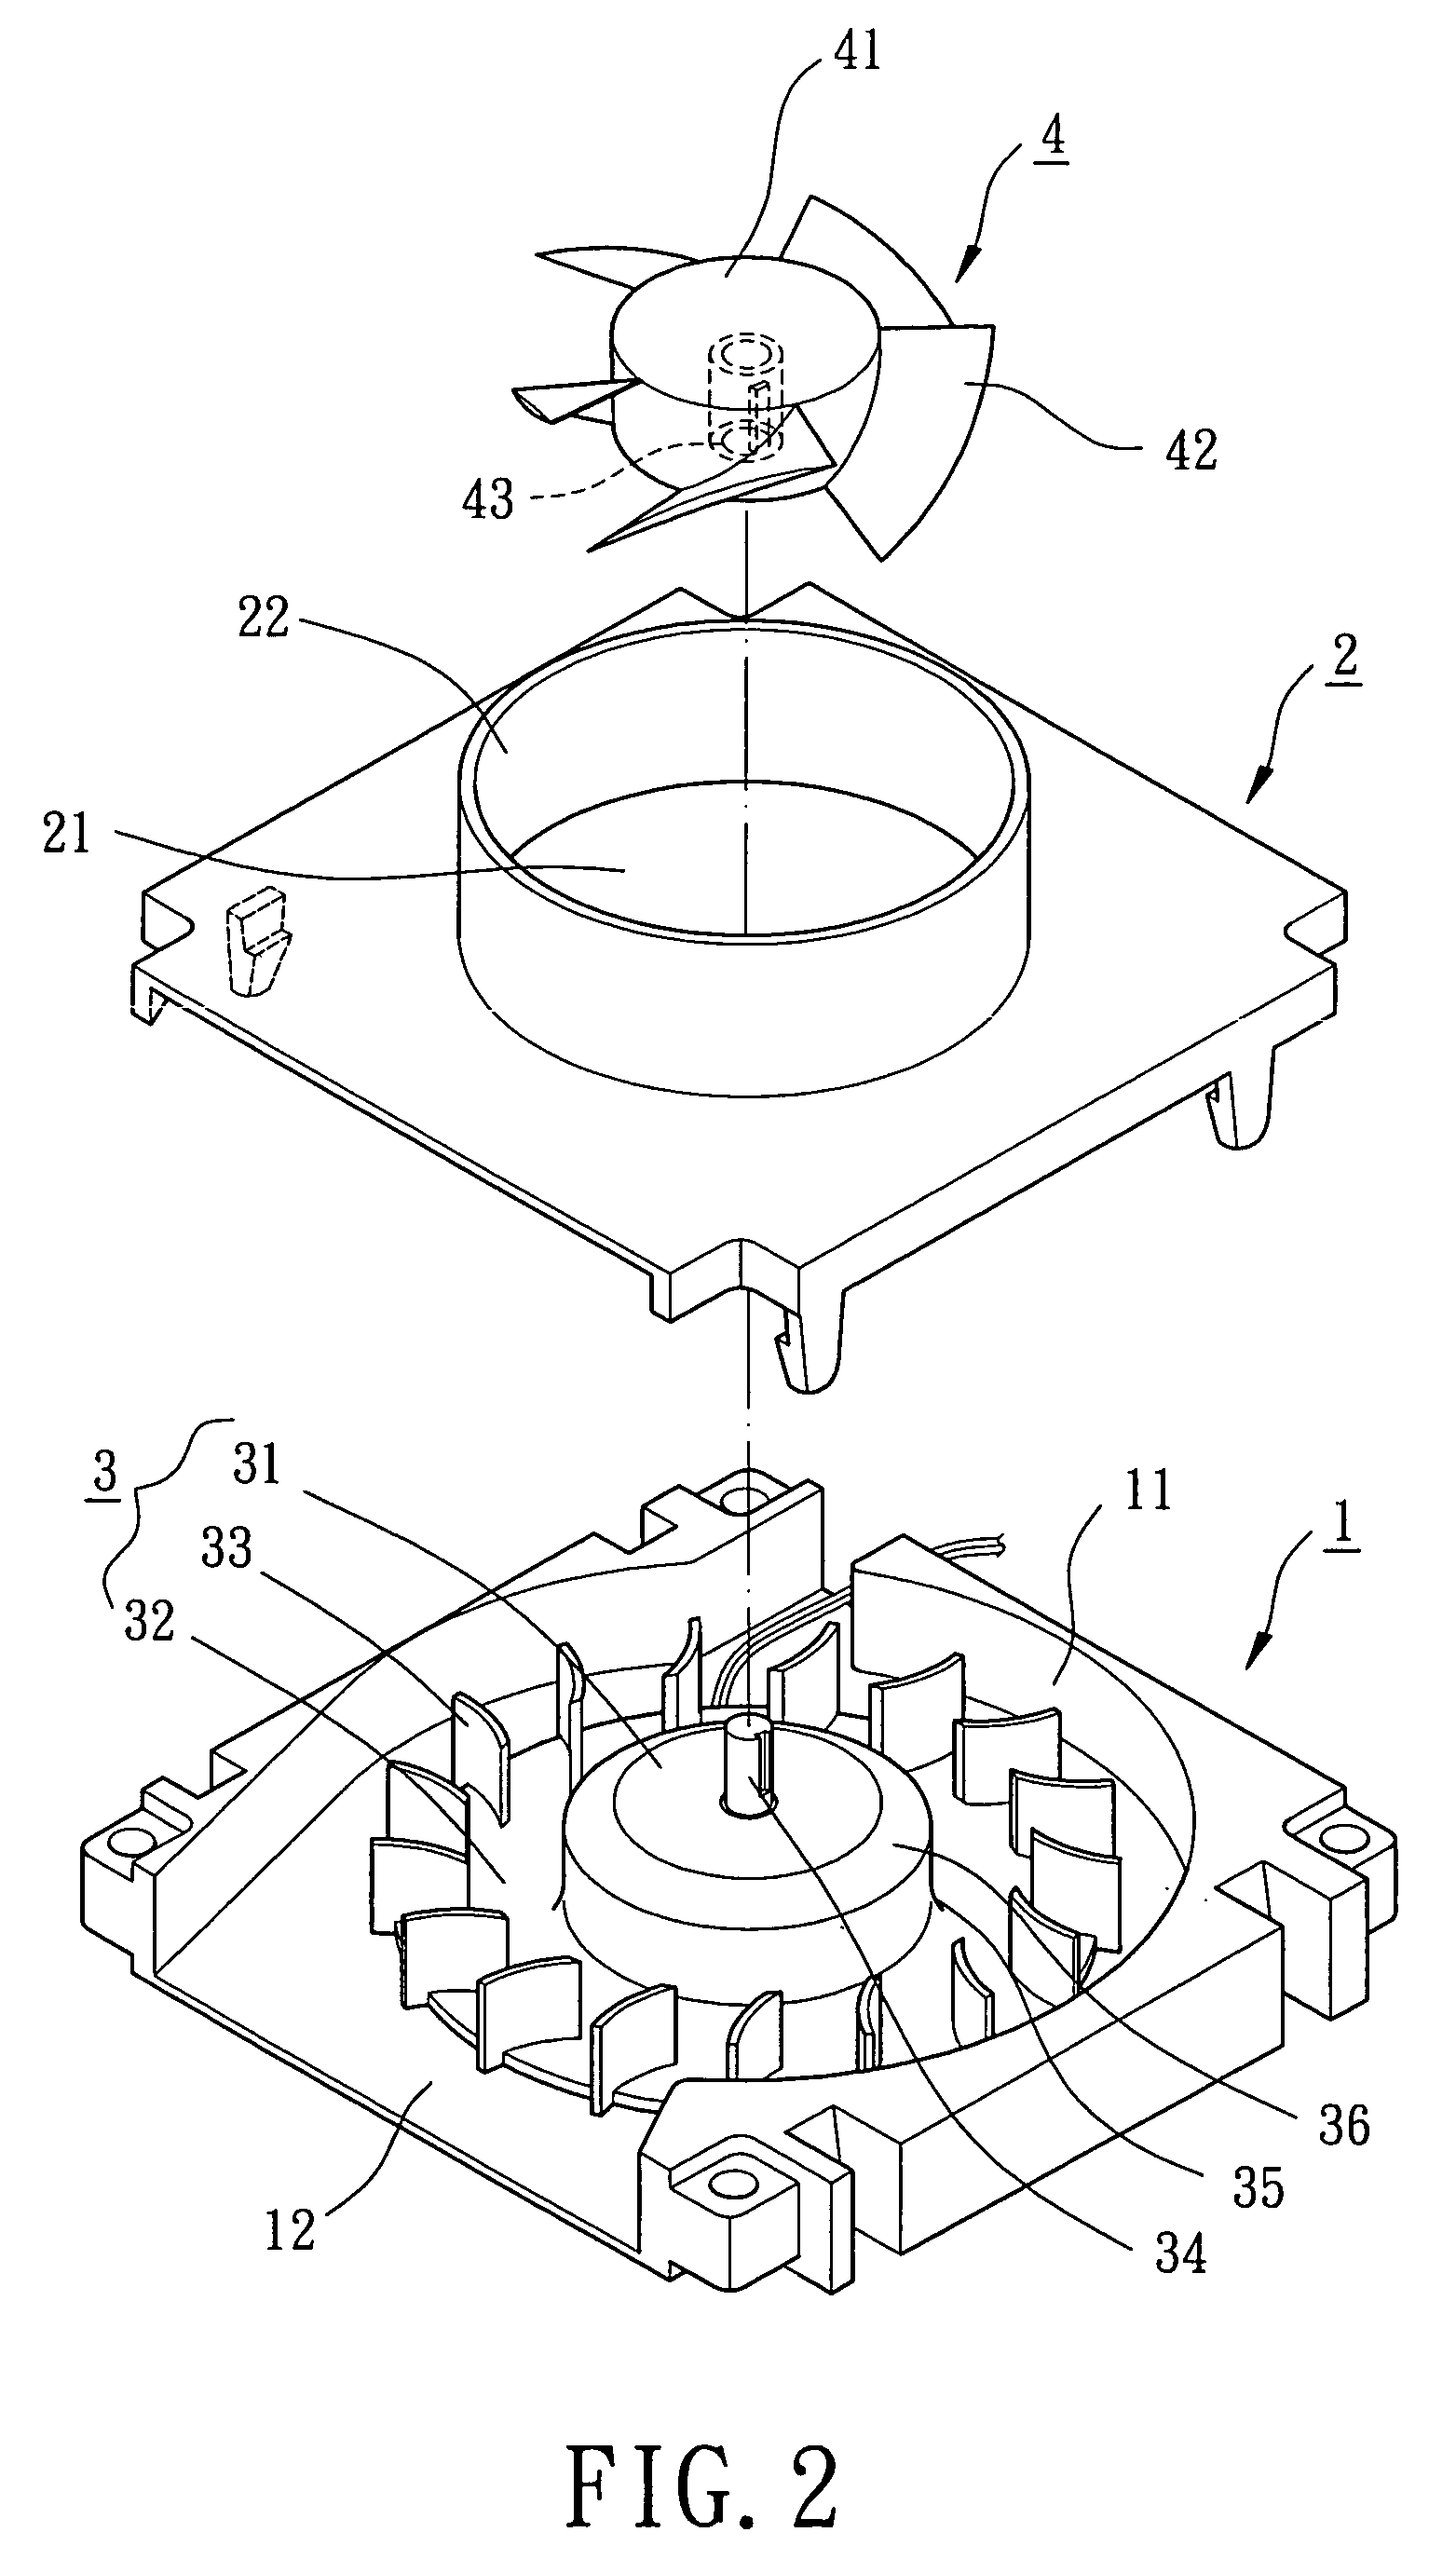 Radial-flow heat-dissipating fan with increased inlet airflow